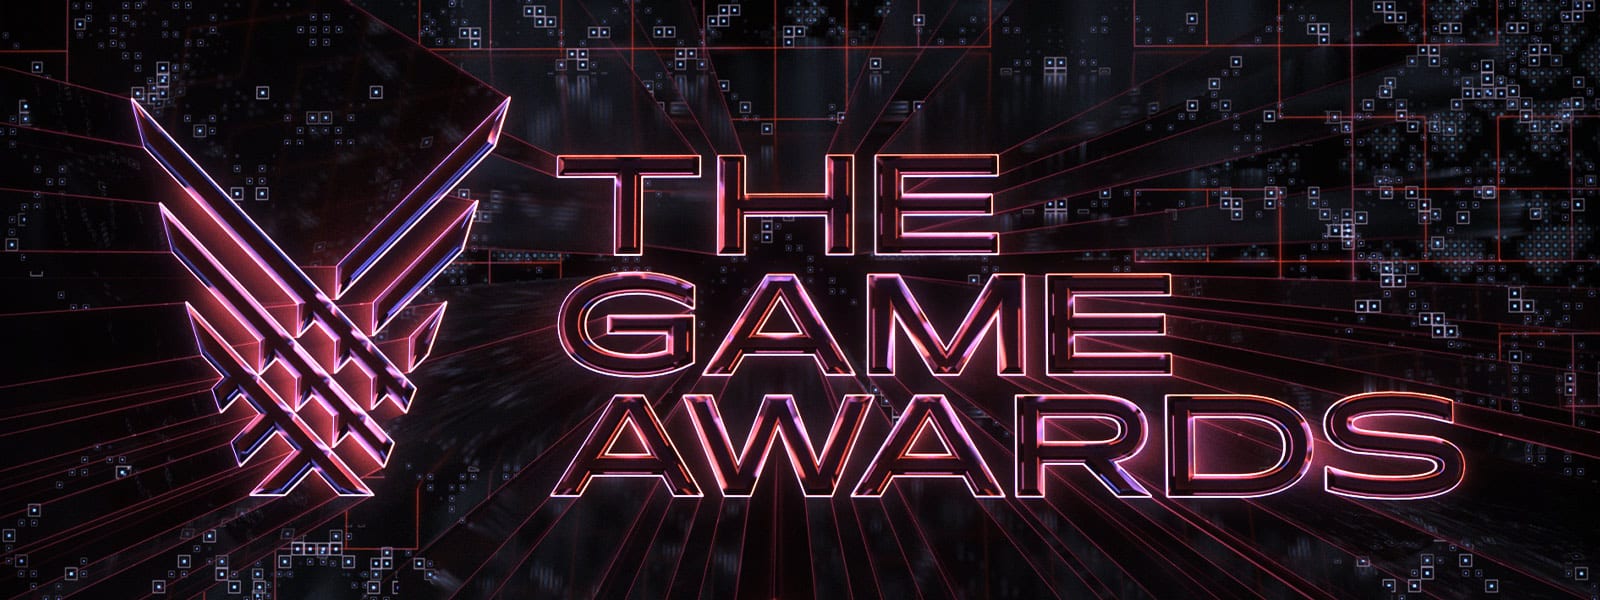 Save up to 50% off Shadow of the Tomb Raider, Battlefield V and more during The Game Awards Sale - OnMSFT.com - December 7, 2018